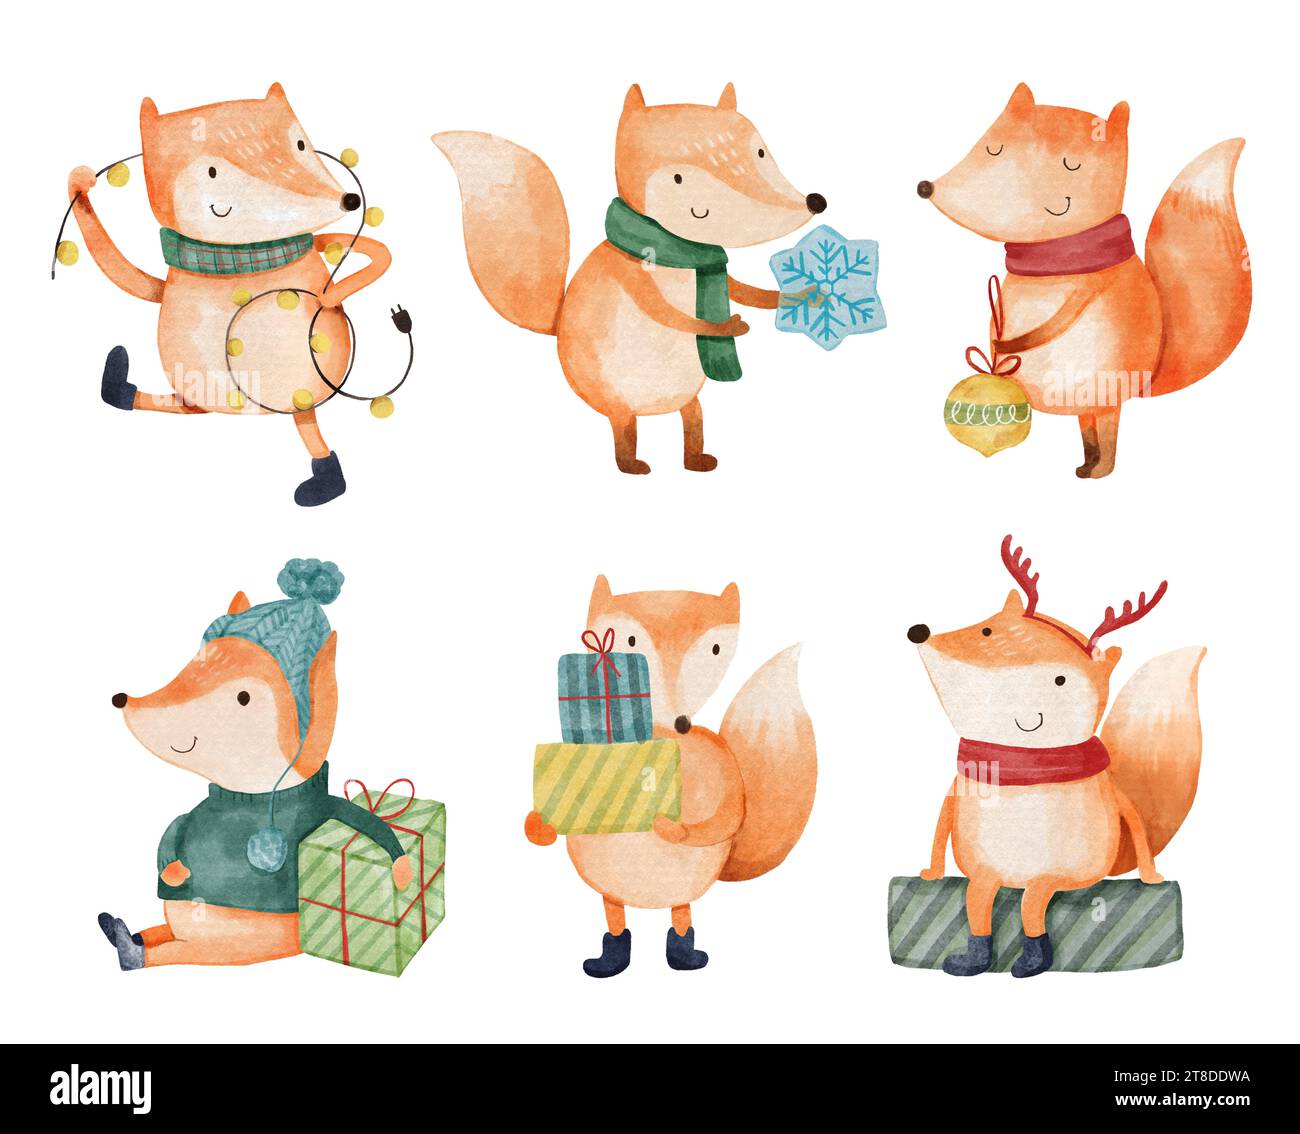 Fox . Christmas theme . Watercolor paint cartoon characters . Isolated . Set 2 of 4 . illustration . Stock Photo